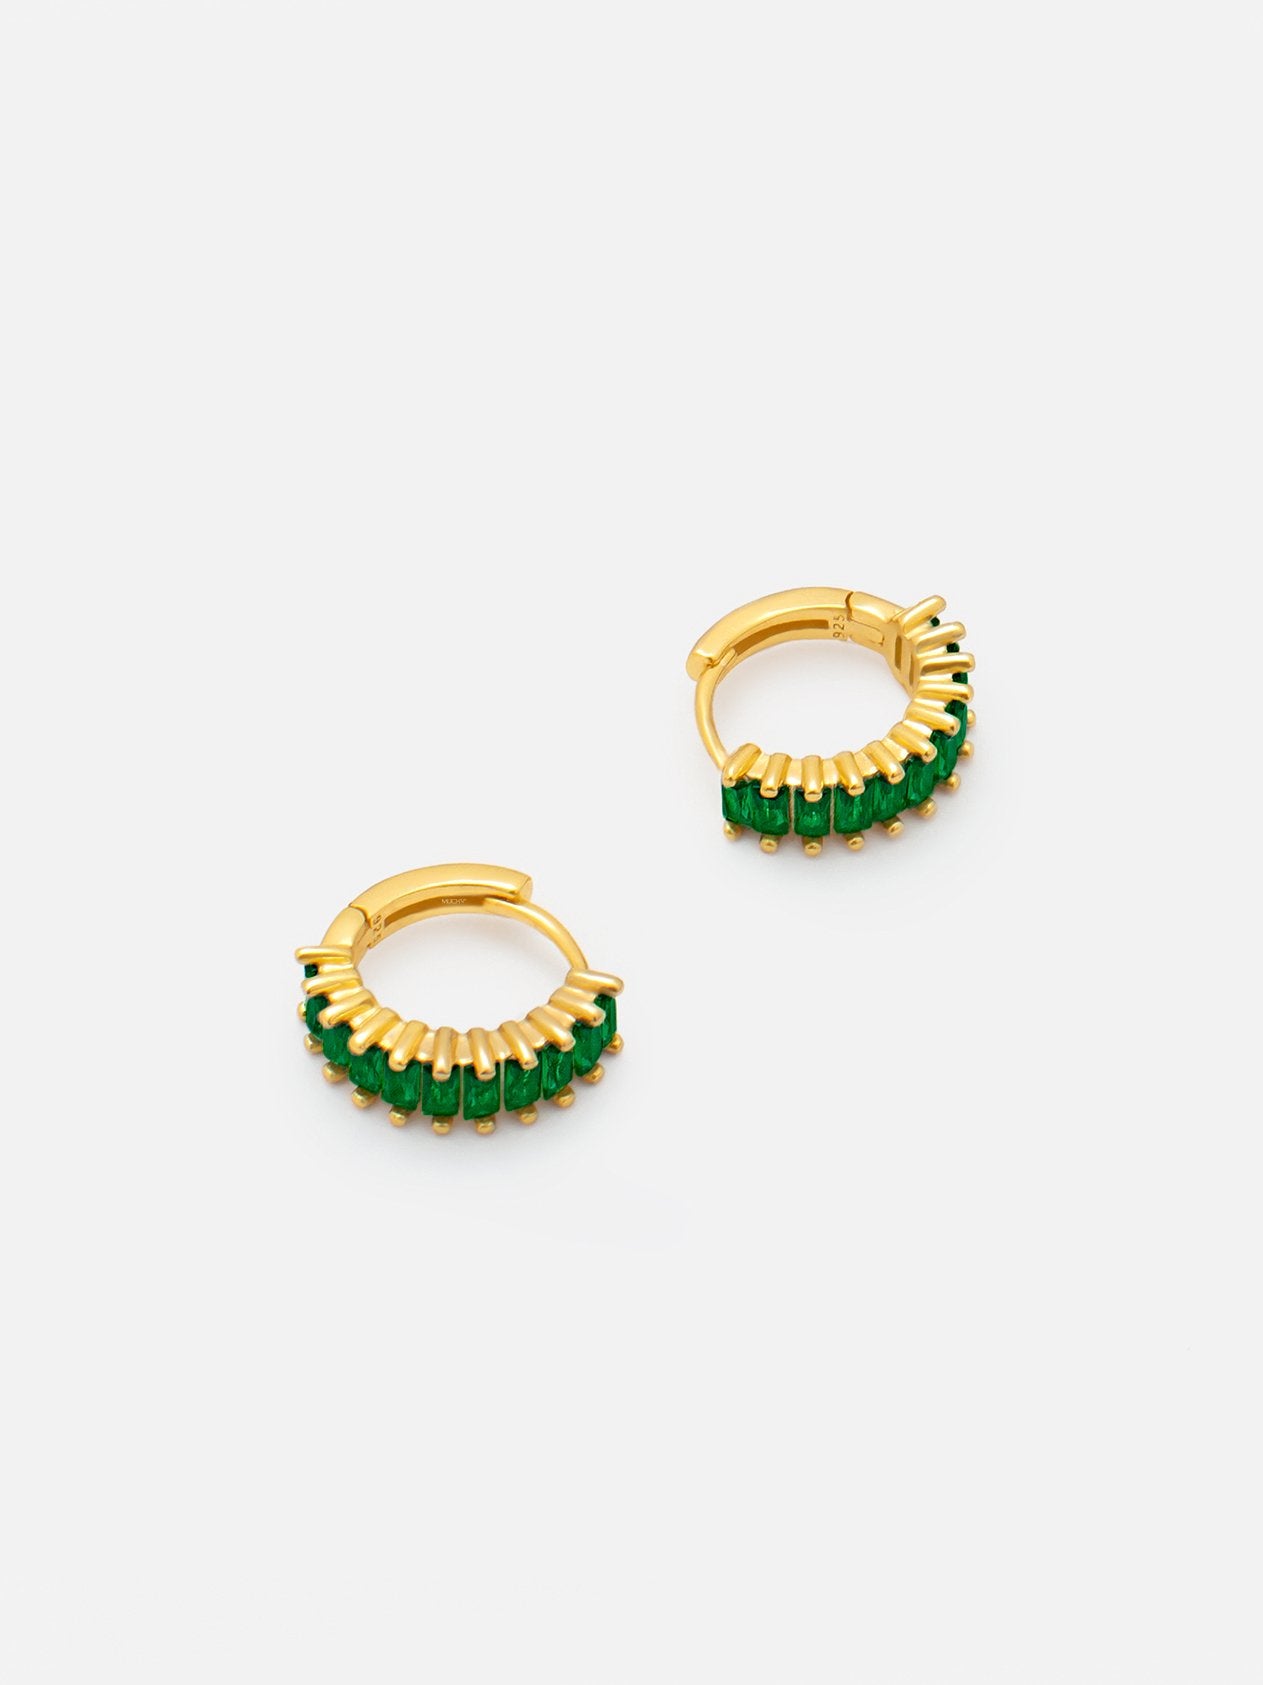 Small Emerald Green Huggie Hoop Earrings(18ct Gold Plated 925 Sterling Silver) - Muchv Jewellery